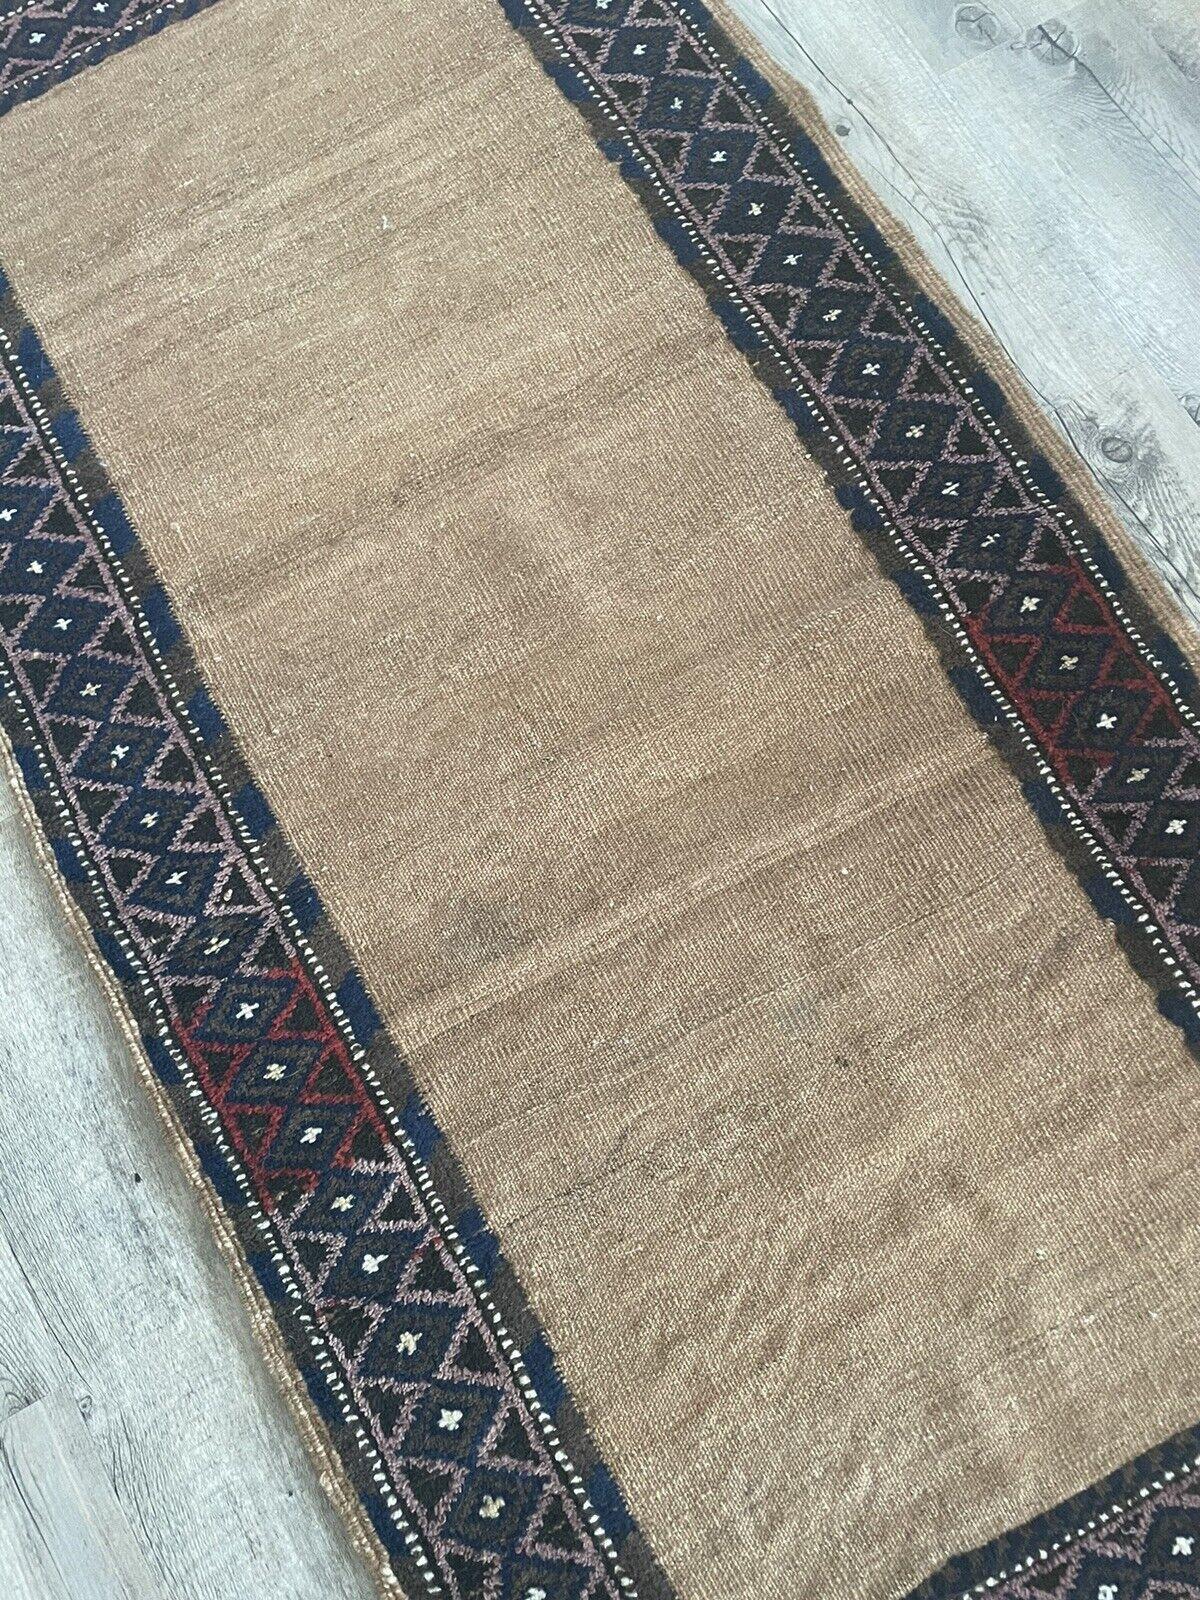 Handmade Antique Afghan Baluch Collectible Rug 2.3' x 5', 1920s - 1N12 For Sale 1